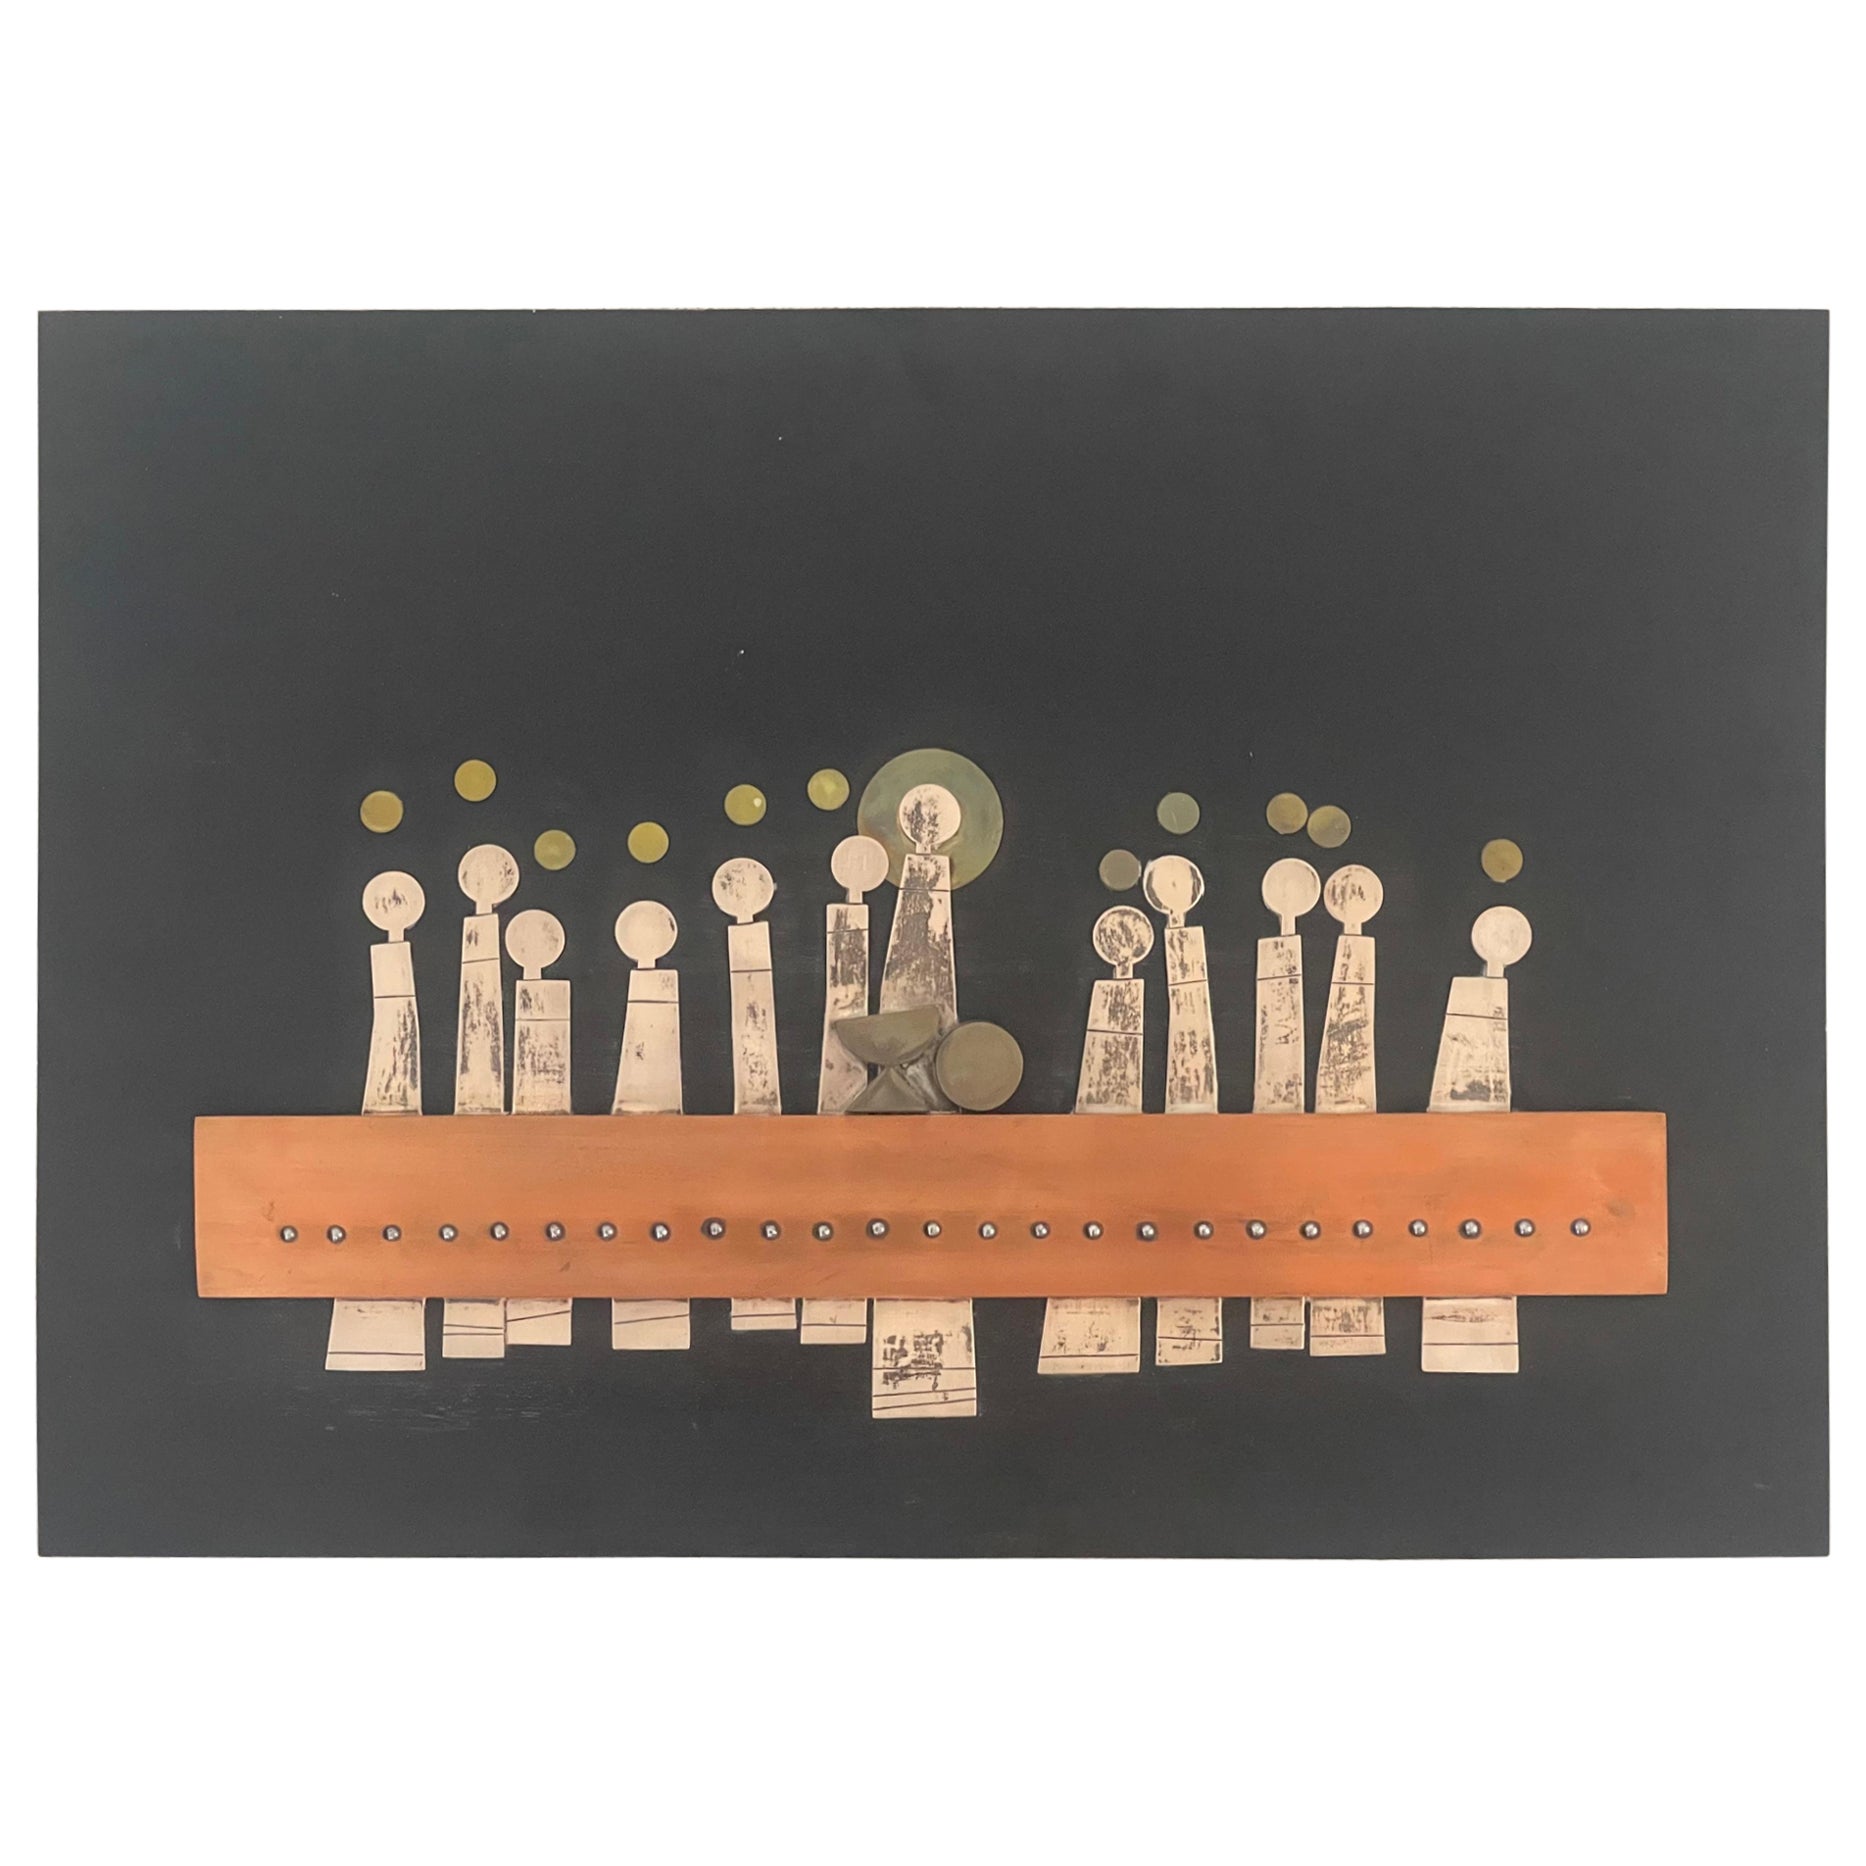 Large Modernist "Last Supper" Wall Sculpture by Talleres Monastico